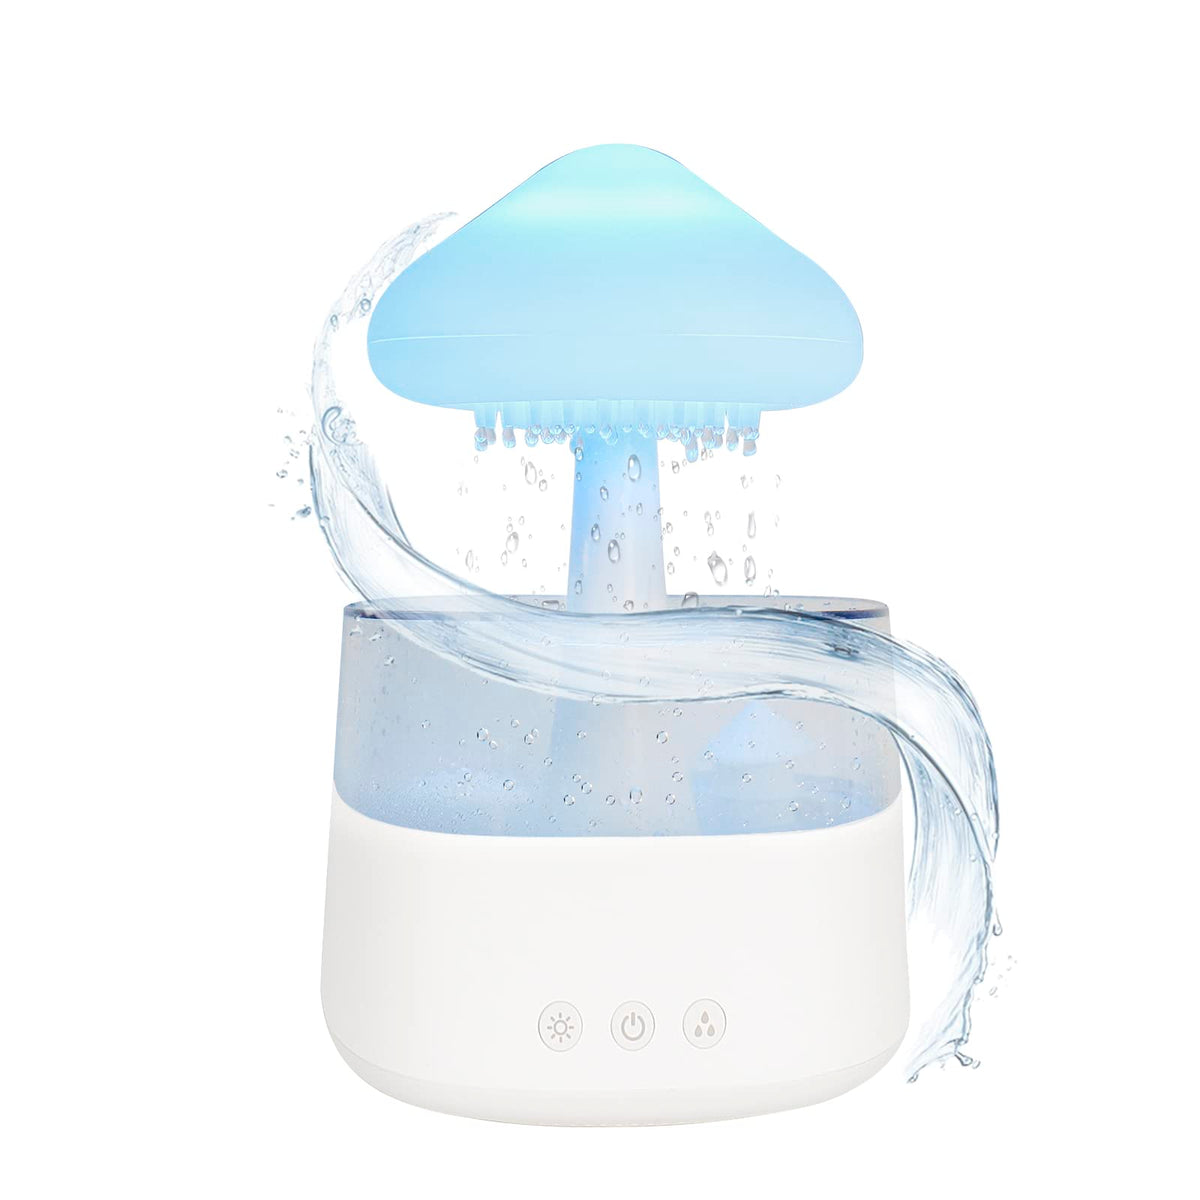 Humidifier Cloud Water Drip 450ML Aromatherapy Essential Oil Diffuser Night Light with 7 Colors LED Lights Water Drop Sound for Bedside Relaxing Sleeping (White)